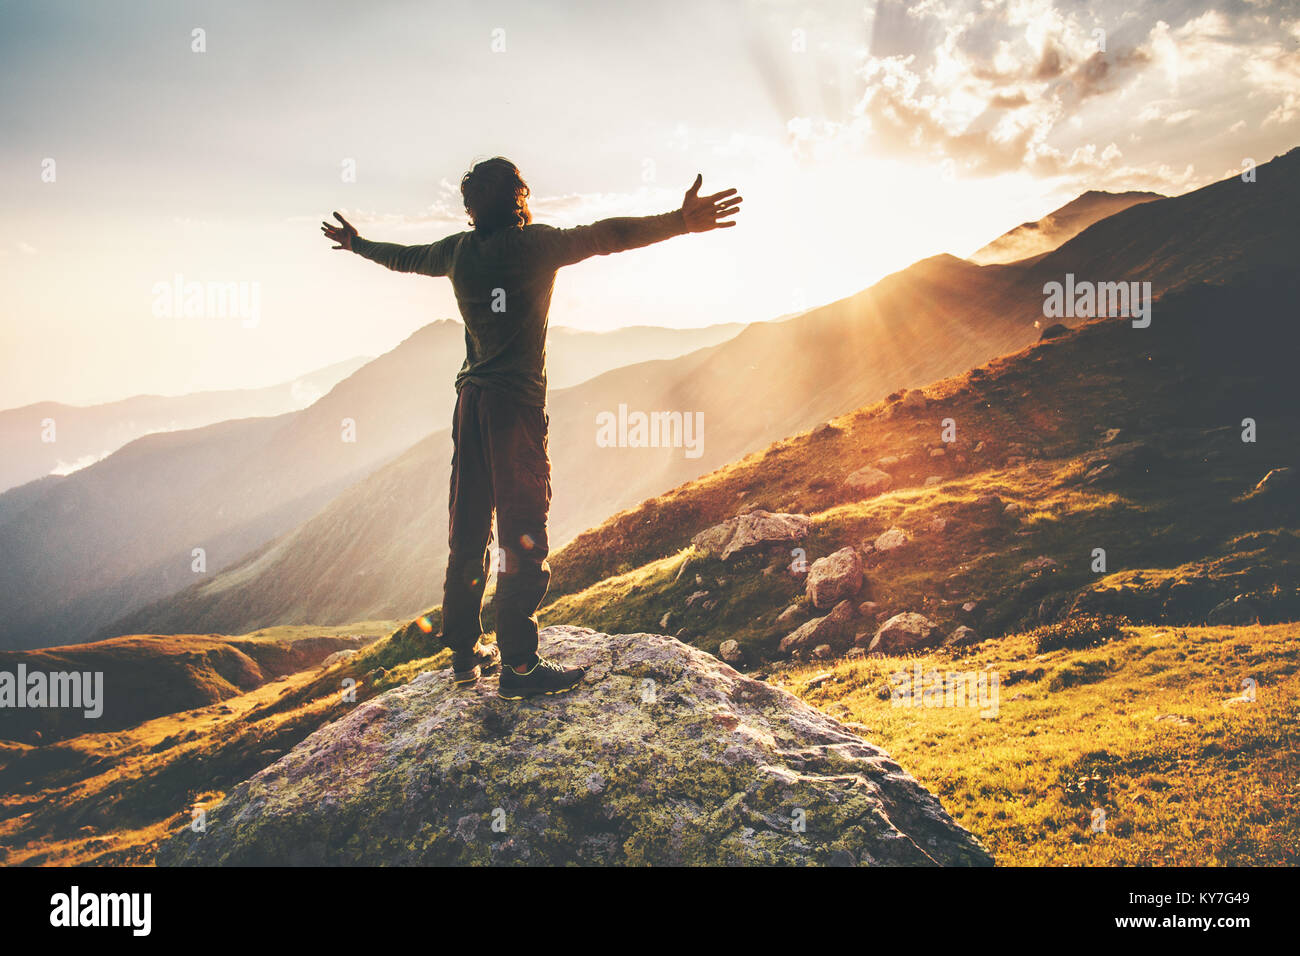 Happy Man raised hands at sunset mountains Travel Lifestyle emotional concept adventure summer vacations outdoor hiking mountaineering harmony with na Stock Photo